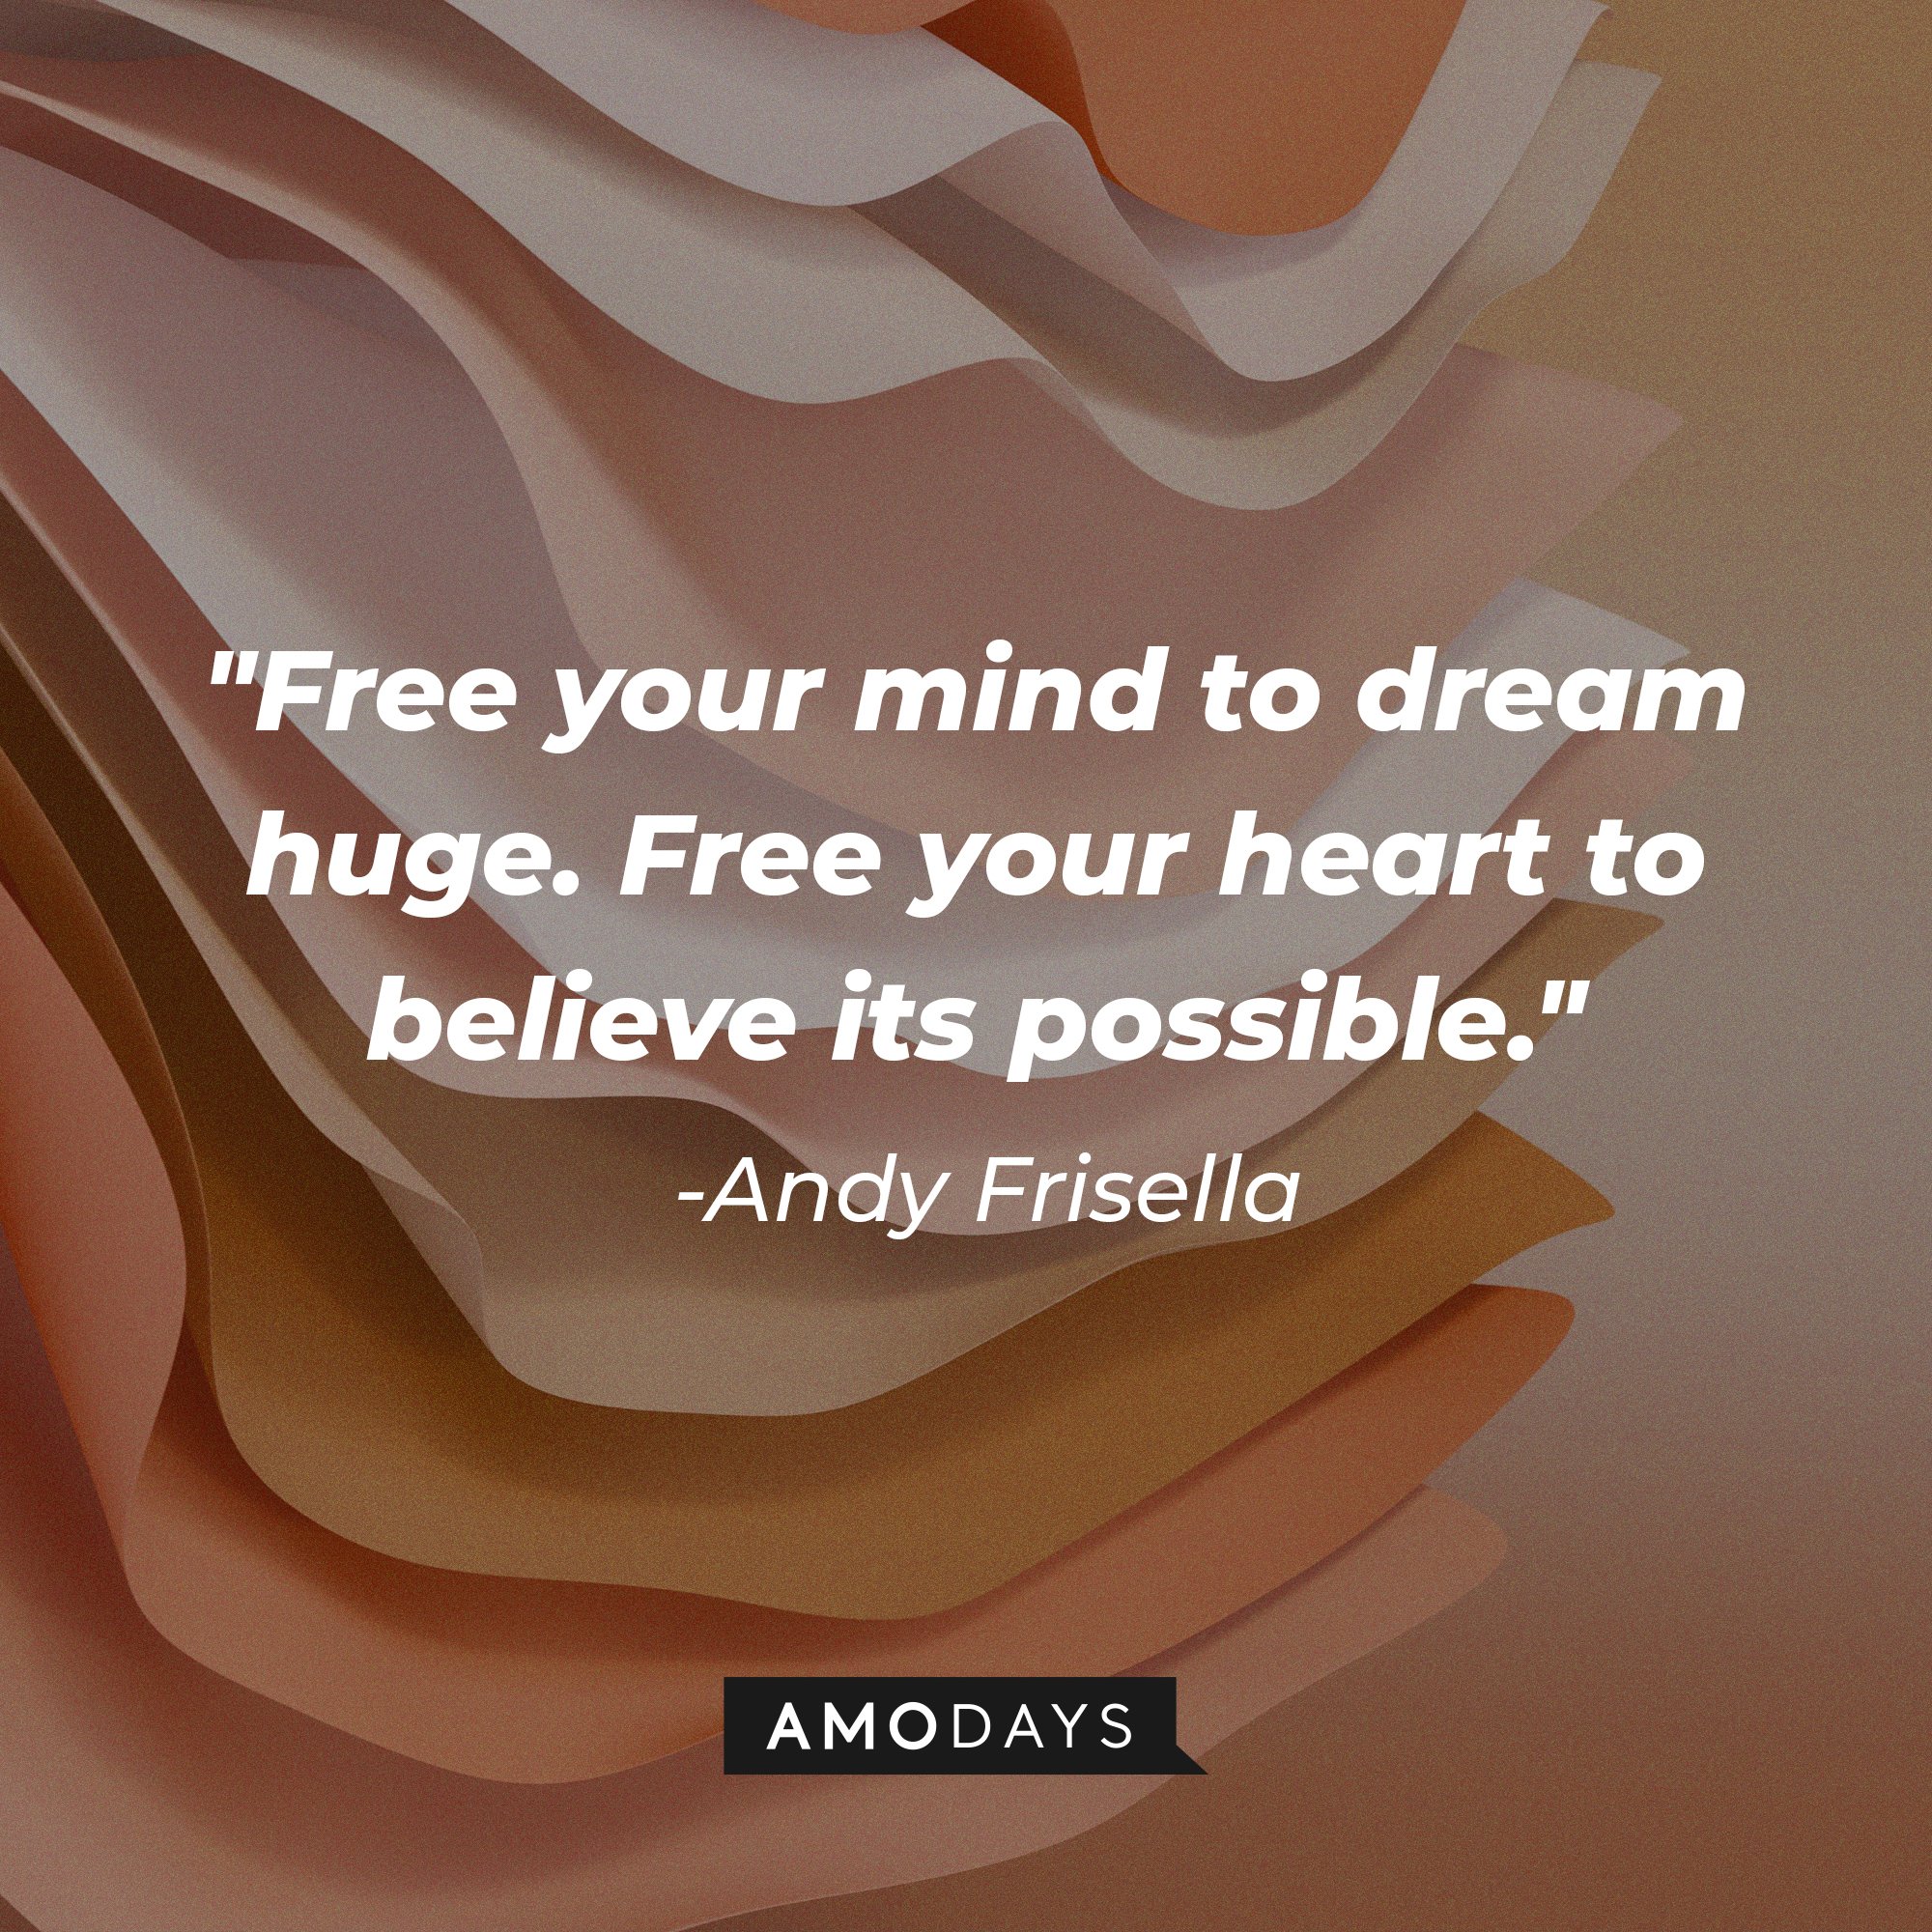 Andy Frisella's quote: "Free your mind to dream huge. Free your heart to believe it's possible." | Image: AmoDays